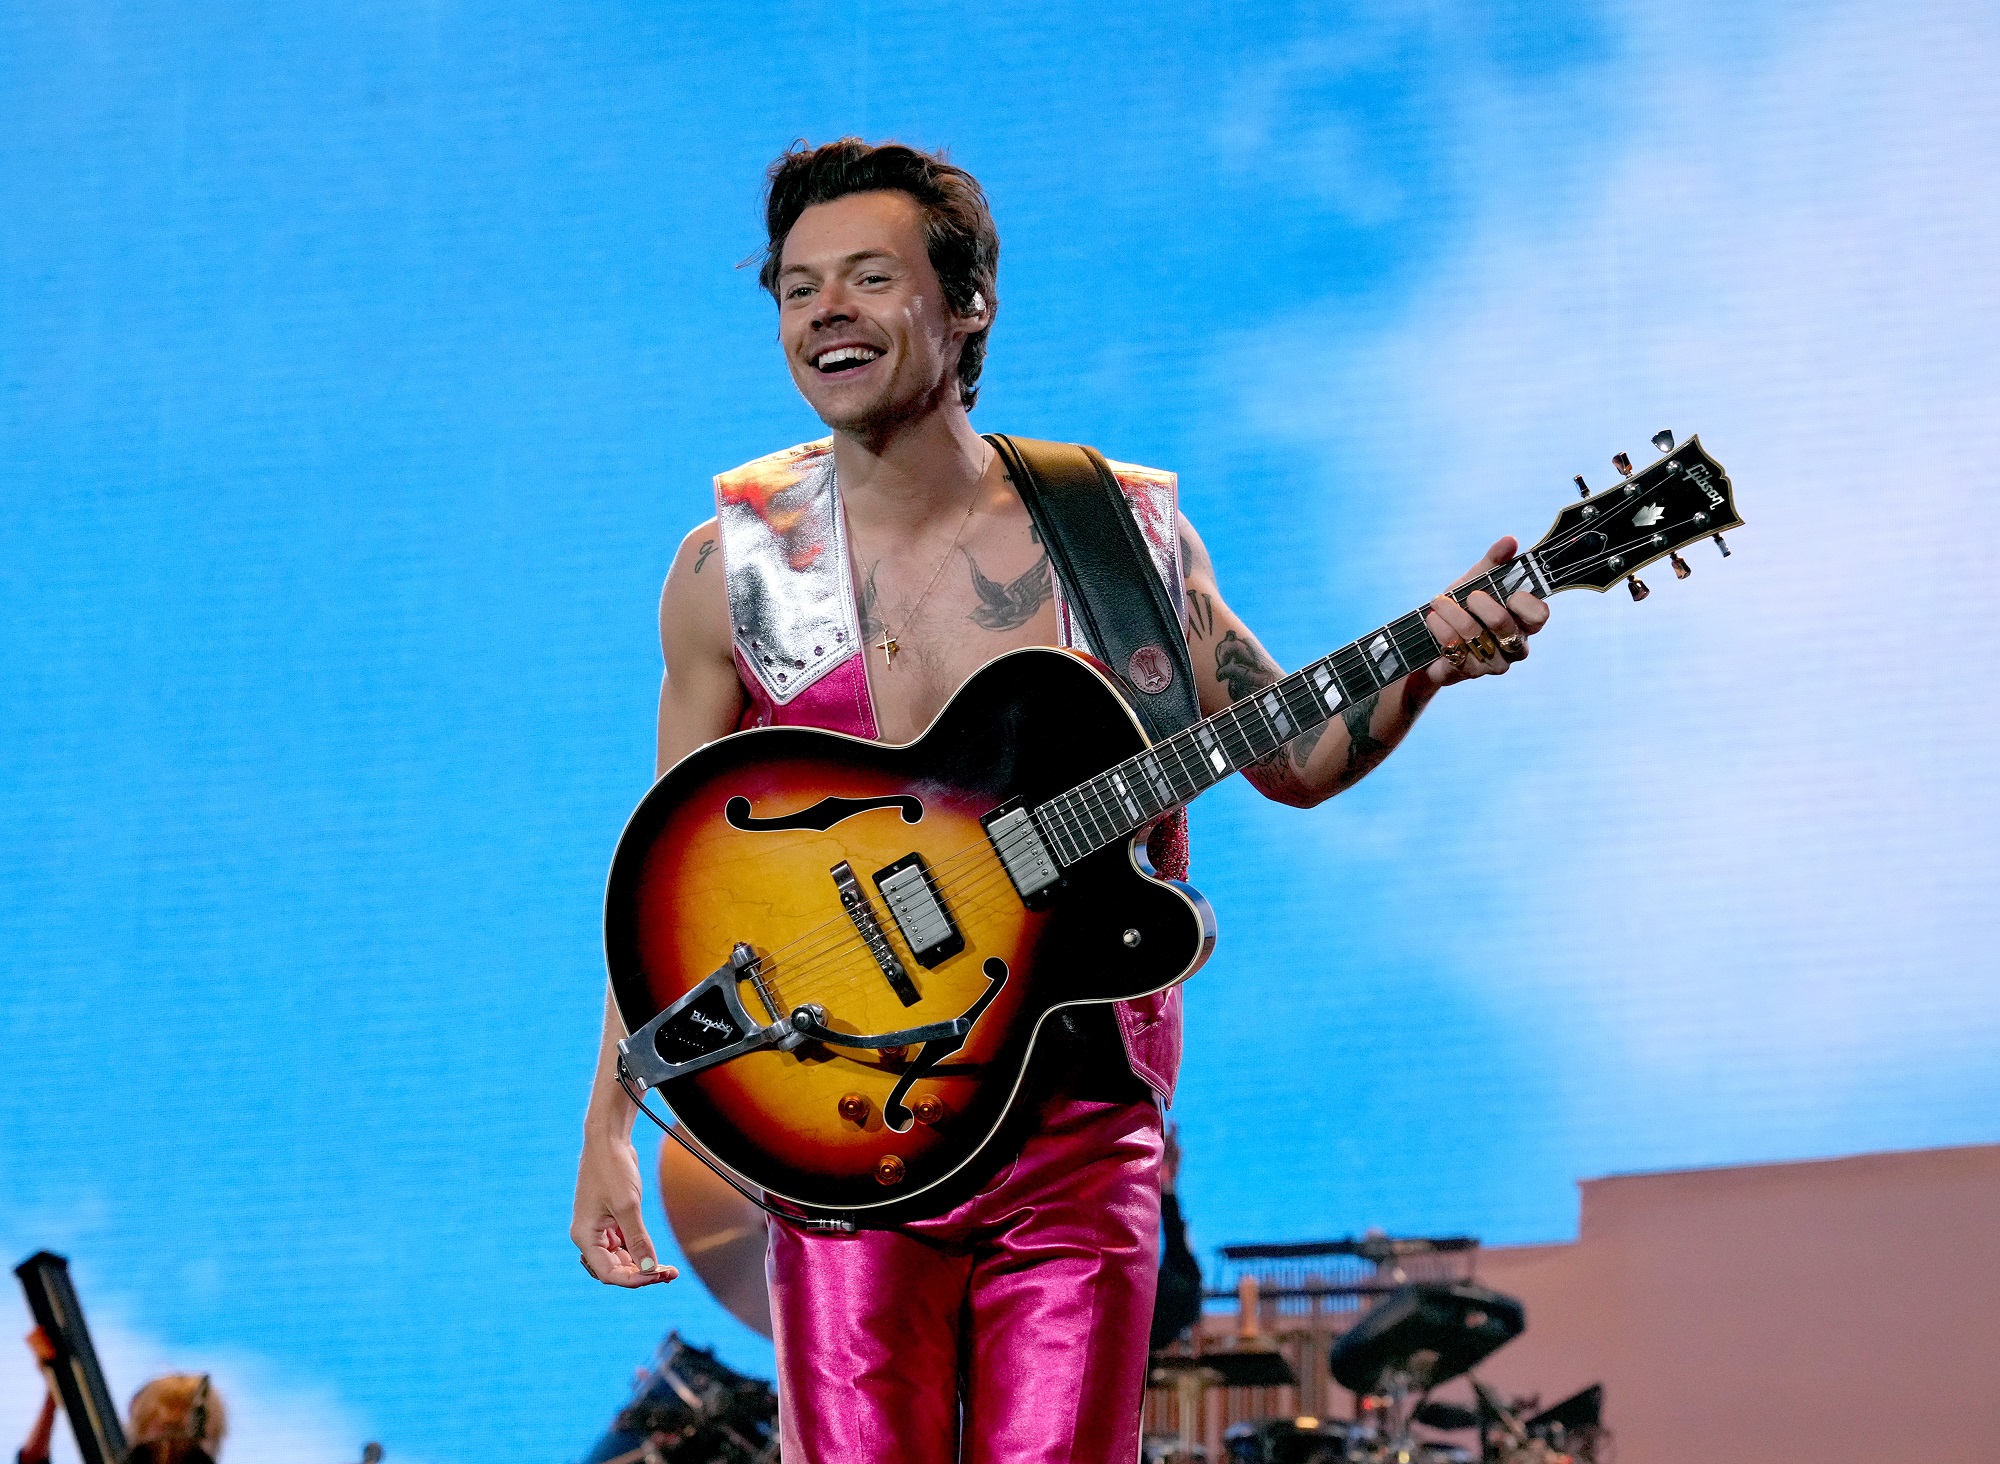 Harry Styles performs during the 2022 Coachella Valley Music And Arts Festival